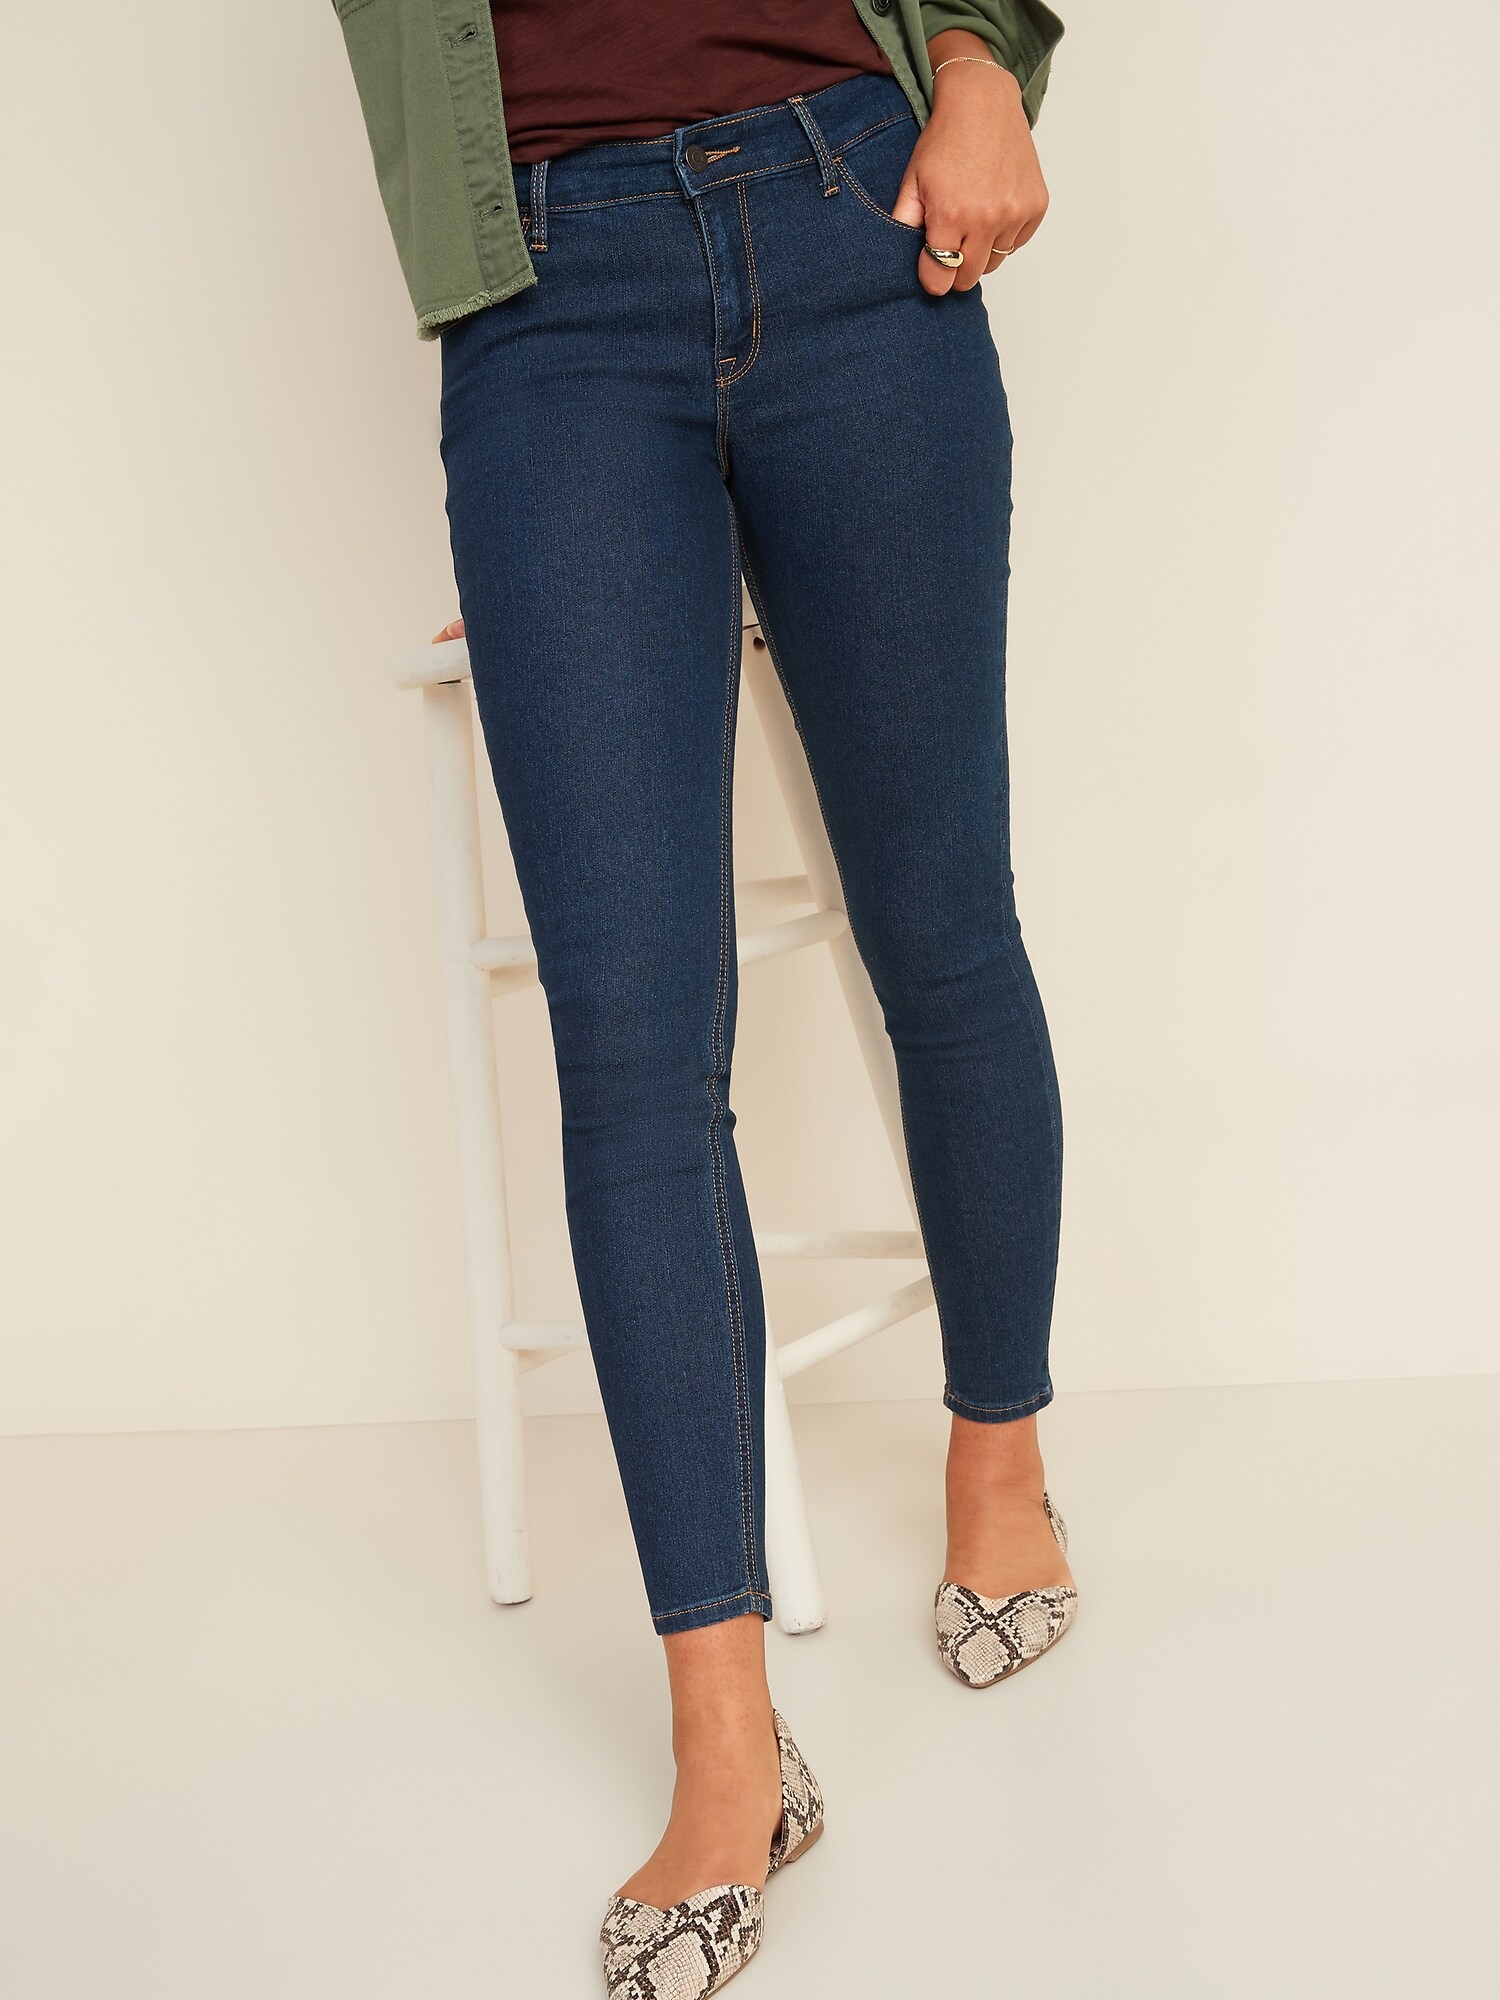 old navy mid rise super skinny jeans